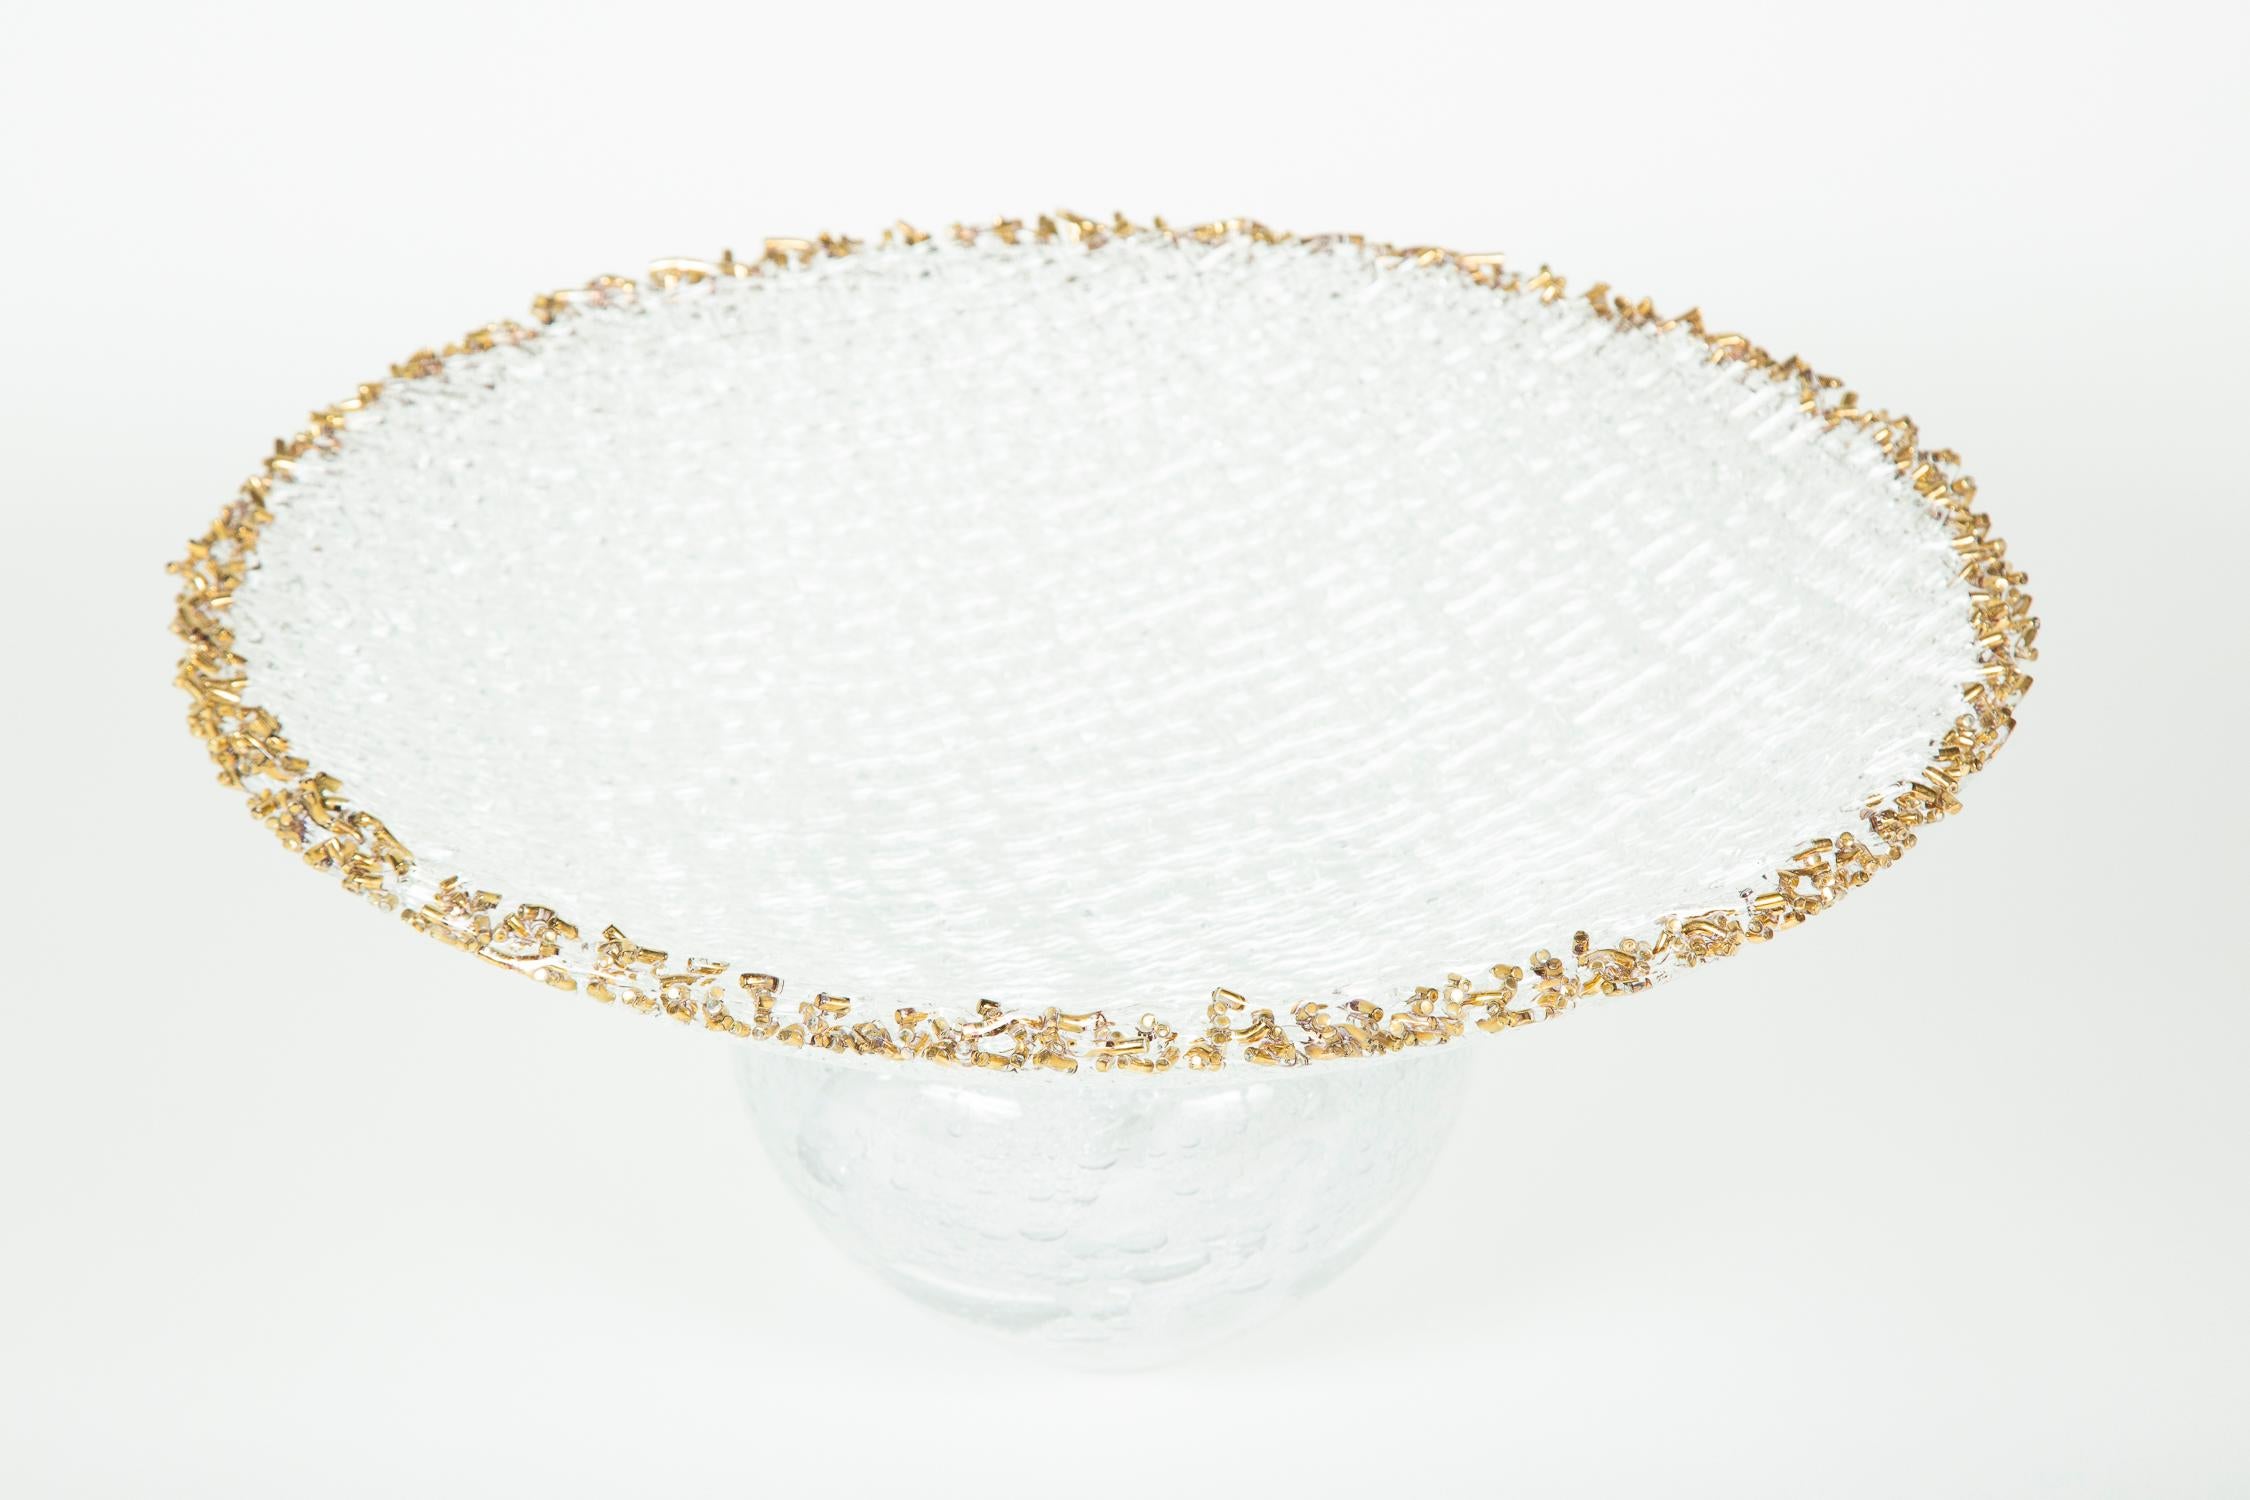 Woven Chalice is a unique clear glass centrepiece / sculpture by the British artist Cathryn Shilling. Using her signature woven glass 'fabric' technique, Shilling layers kiln formed glass cane to create the raised main dish, which is finished with a